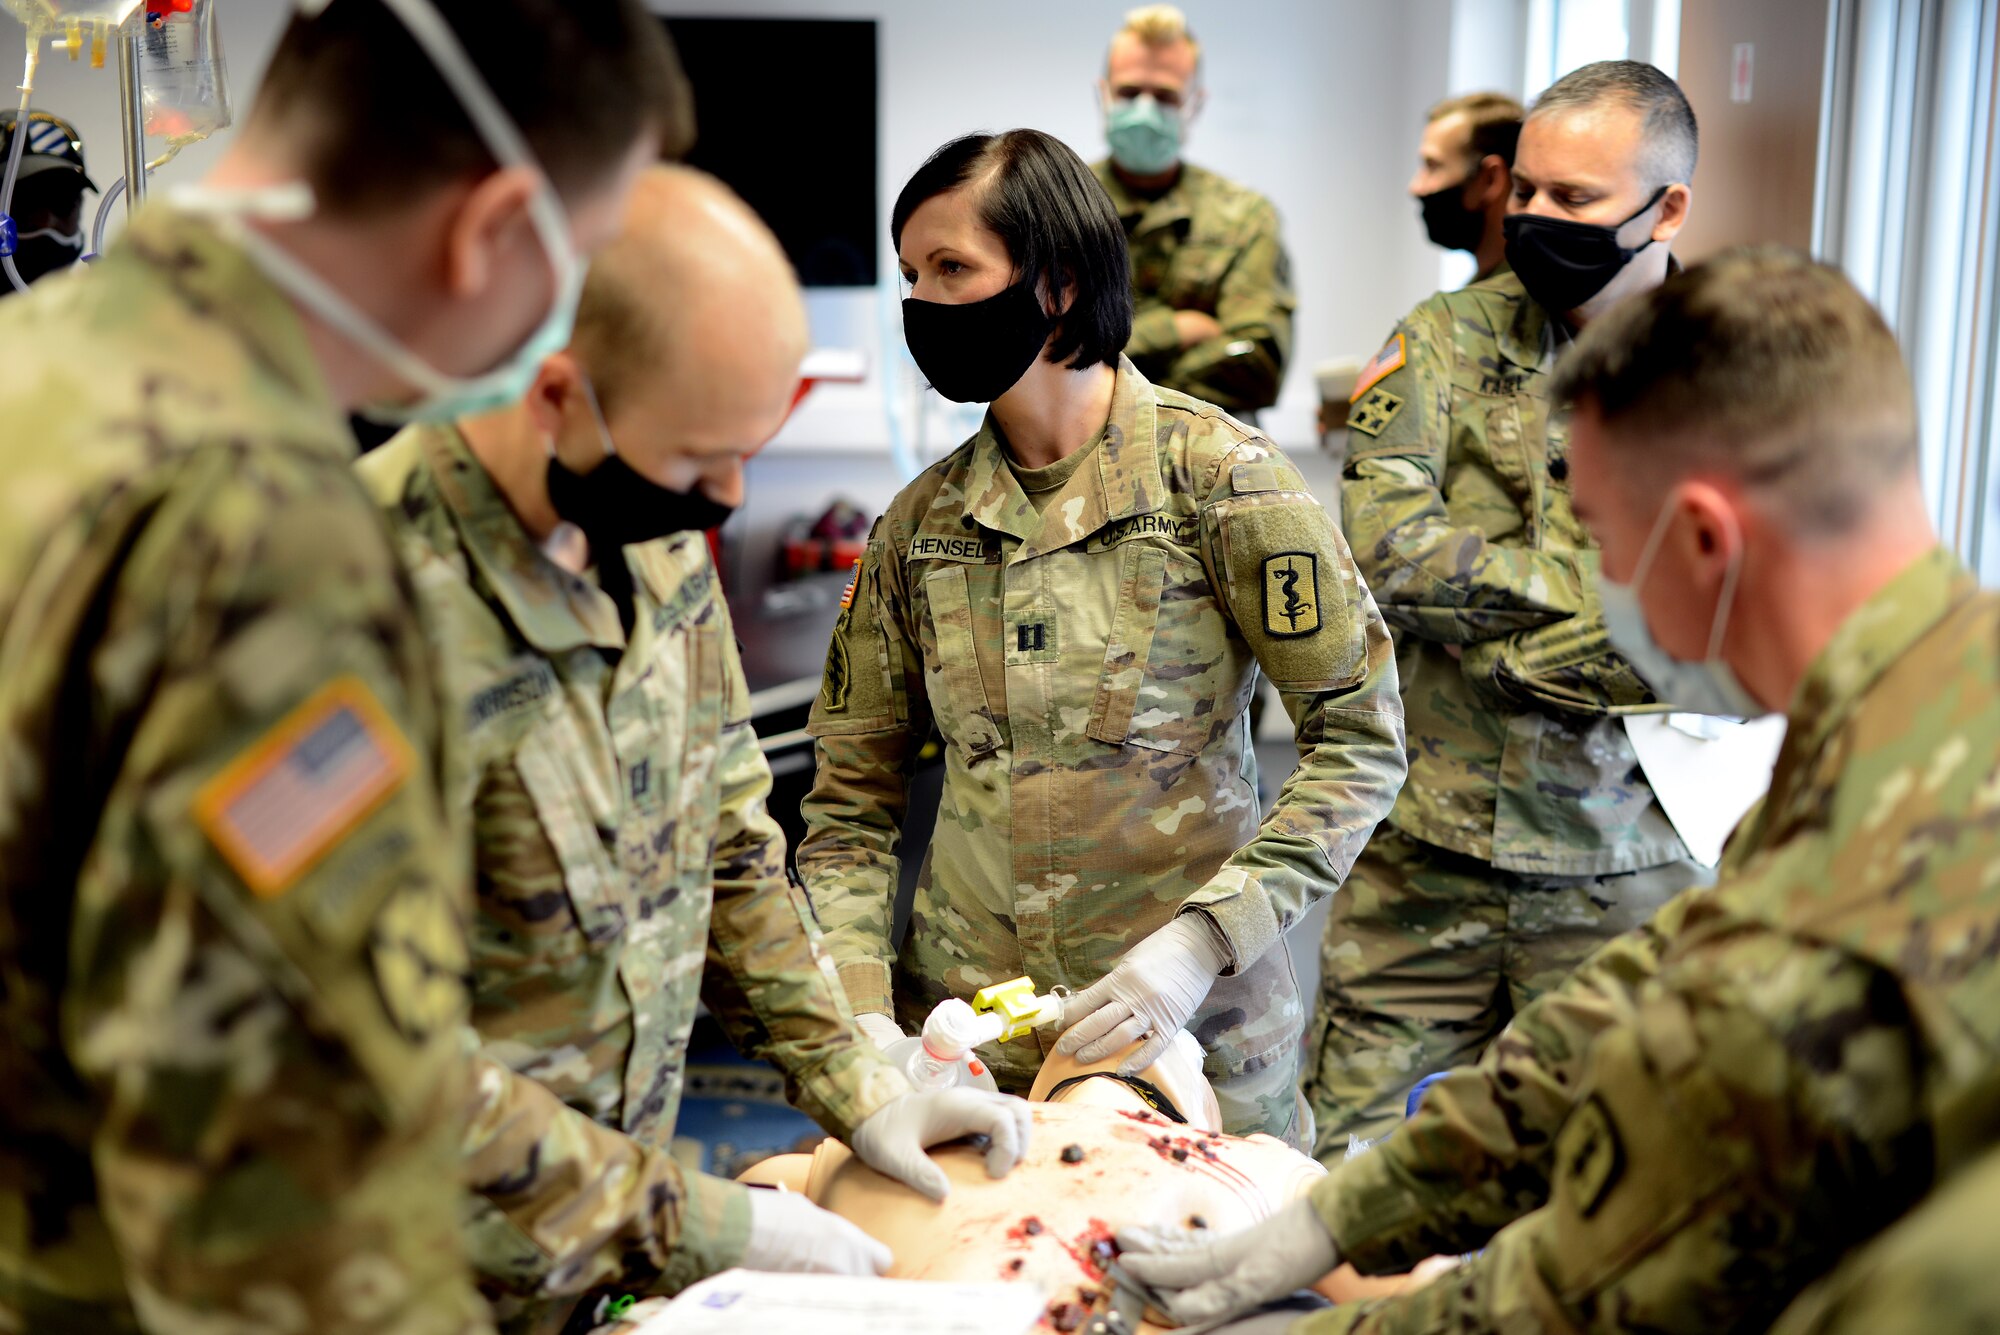 U.S. Army Capt. Jennifer Hensel, 67th Forward Resuscitative Surgical Team Nurse Anesthetist, provides ventilations via a bag valve mask to an intubated patient during a training scenario at the Medical Simulation Training Center, Ramstein Air Base, June 19, 2020.